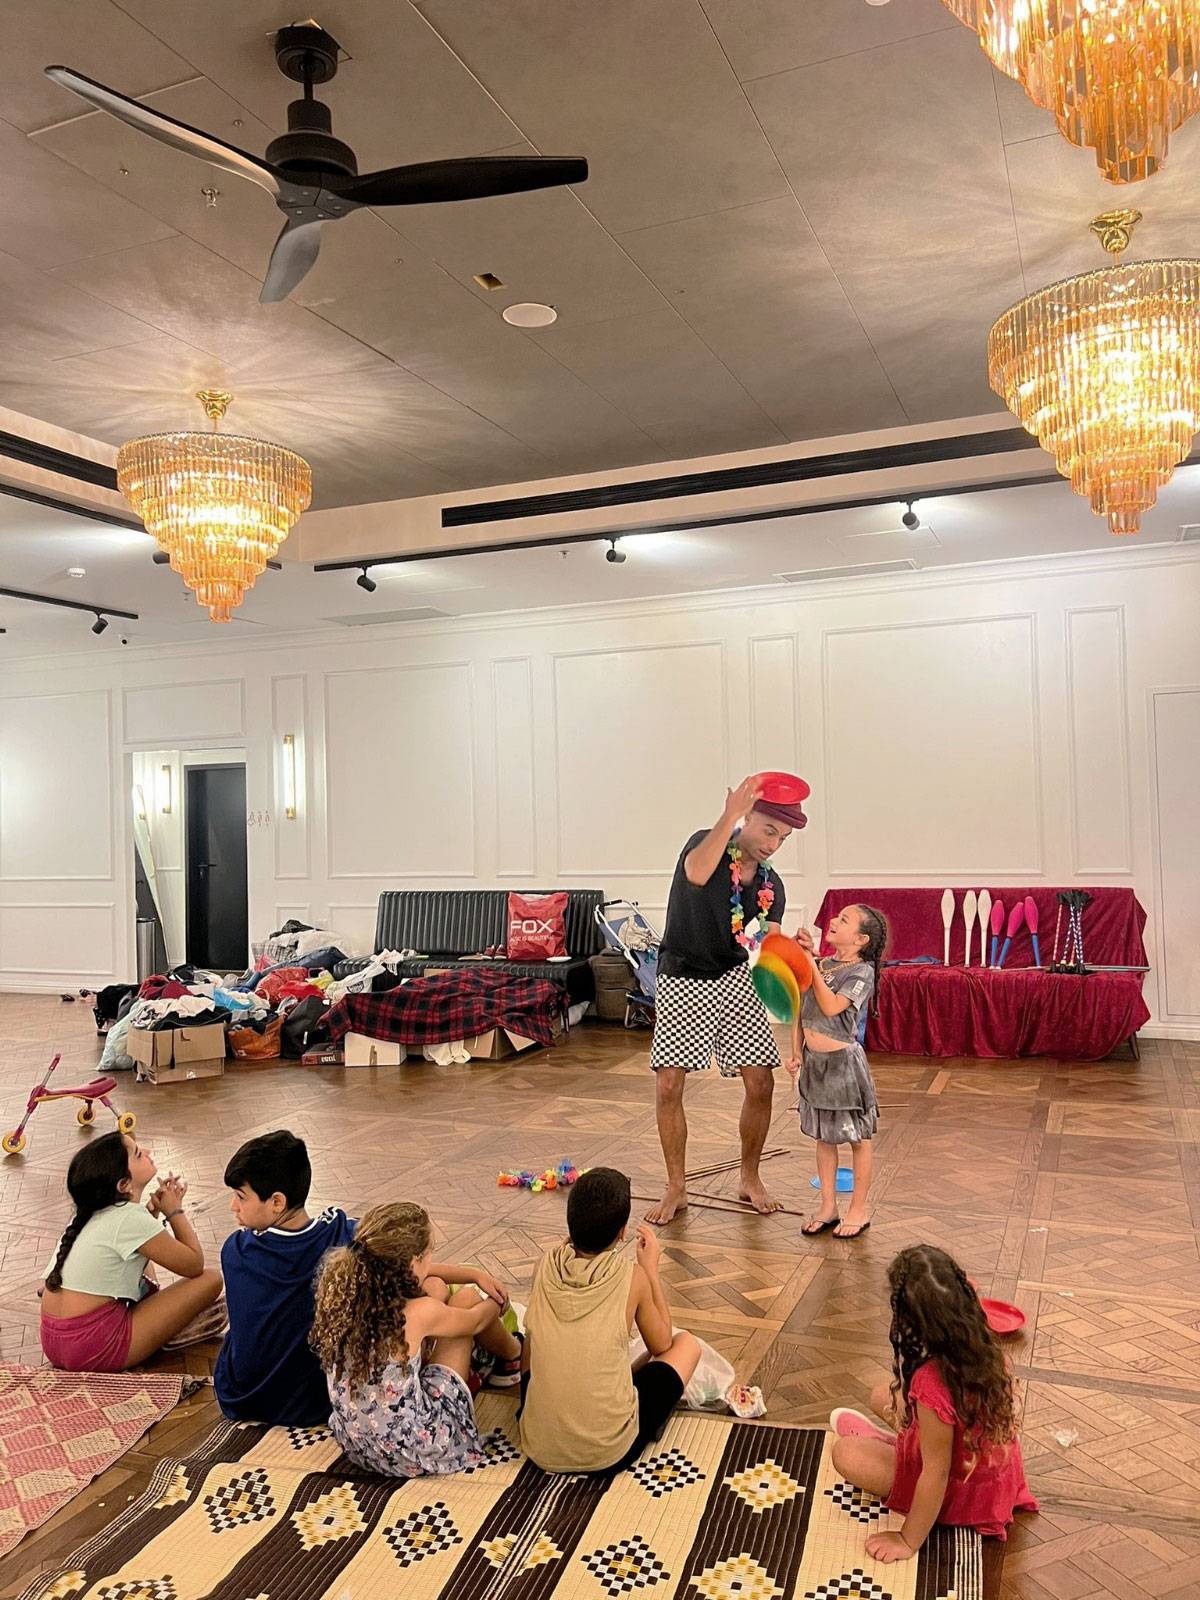 In addition to accommodation, the Brown Bobo hotel in Tel Aviv has been providing activities and entertainment for children